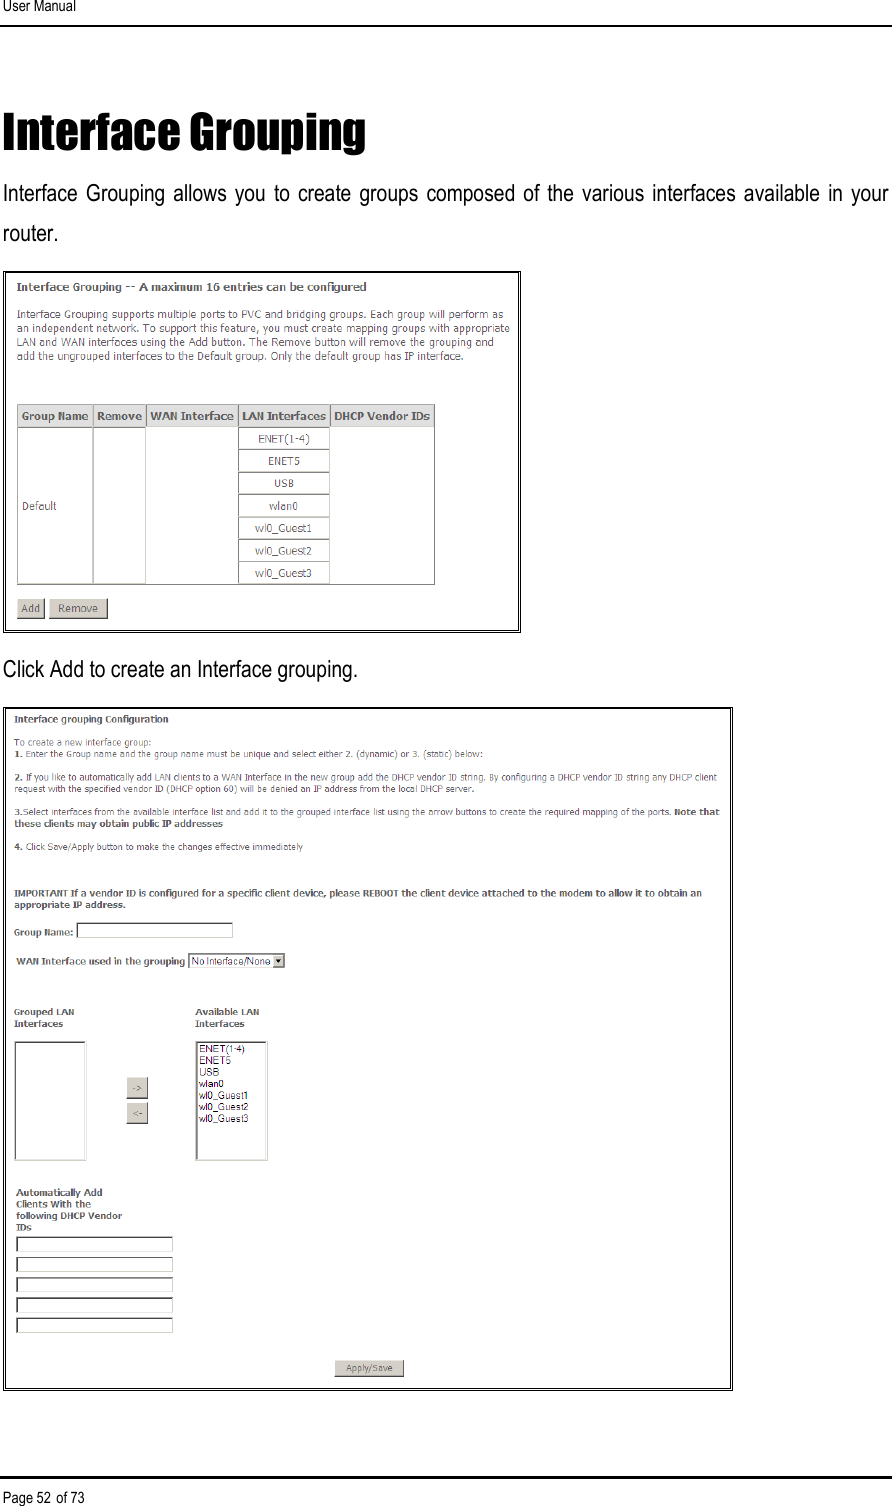 User Manual Page 52 of 73 Interface Grouping Interface Grouping allows you  to create  groups composed  of the various interfaces  available in  your router.  Click Add to create an Interface grouping.  